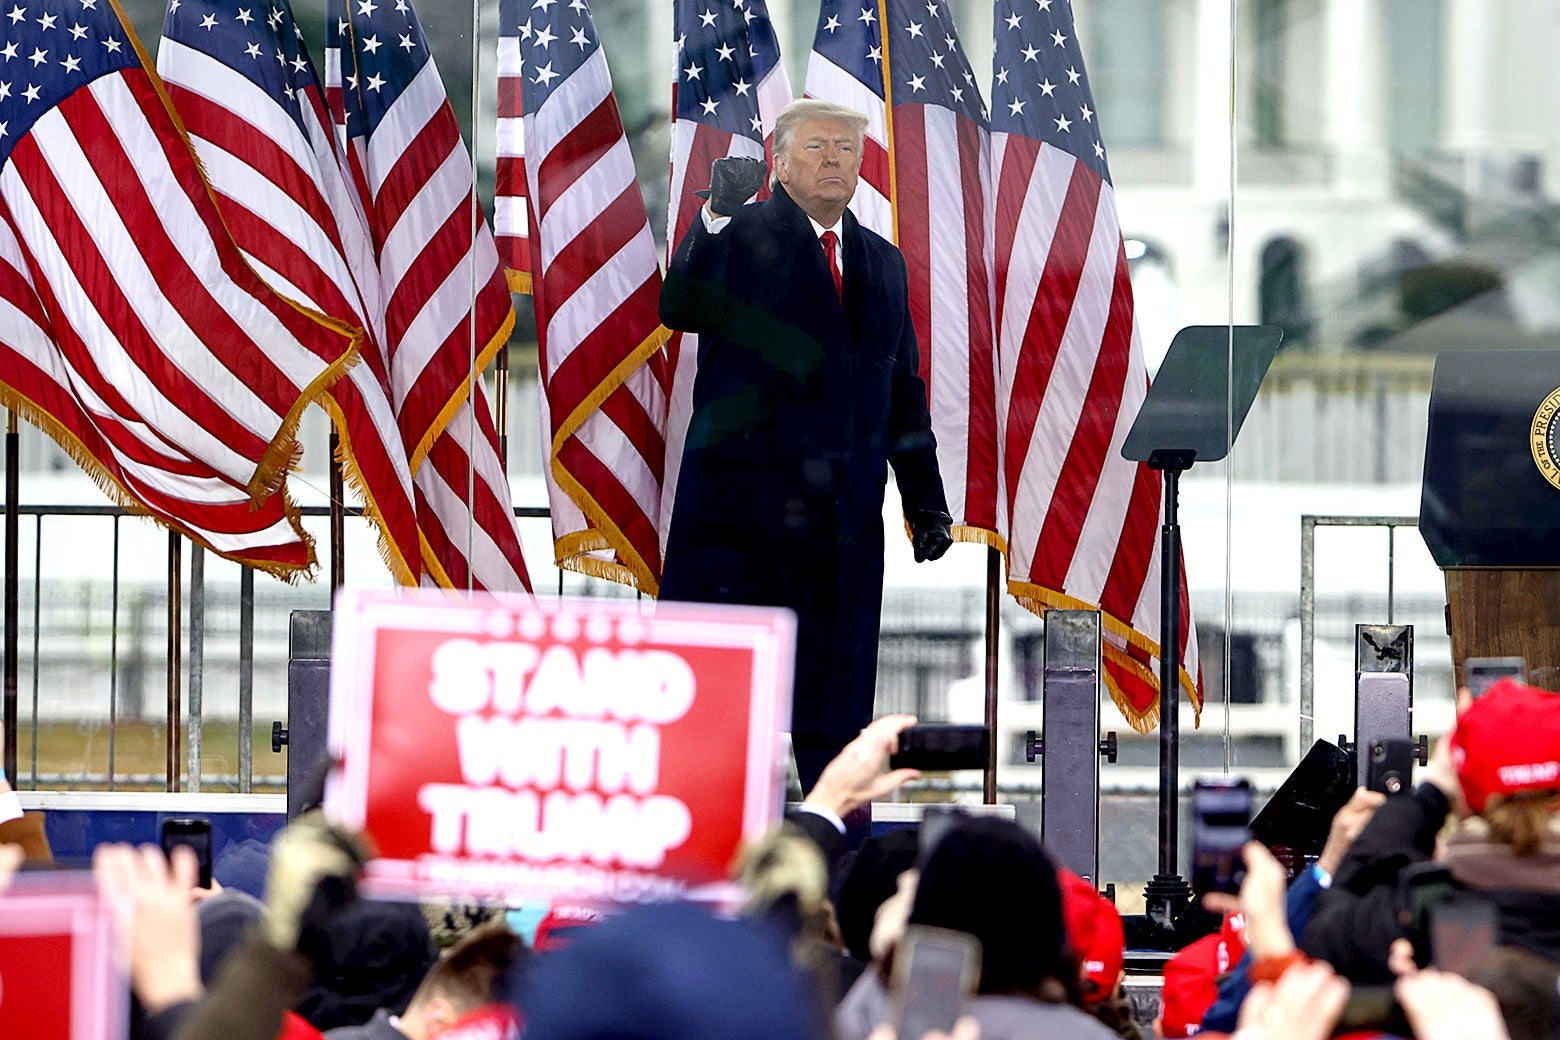 Donald Trump, on a stage with American flags, pumps his fist for protesters.